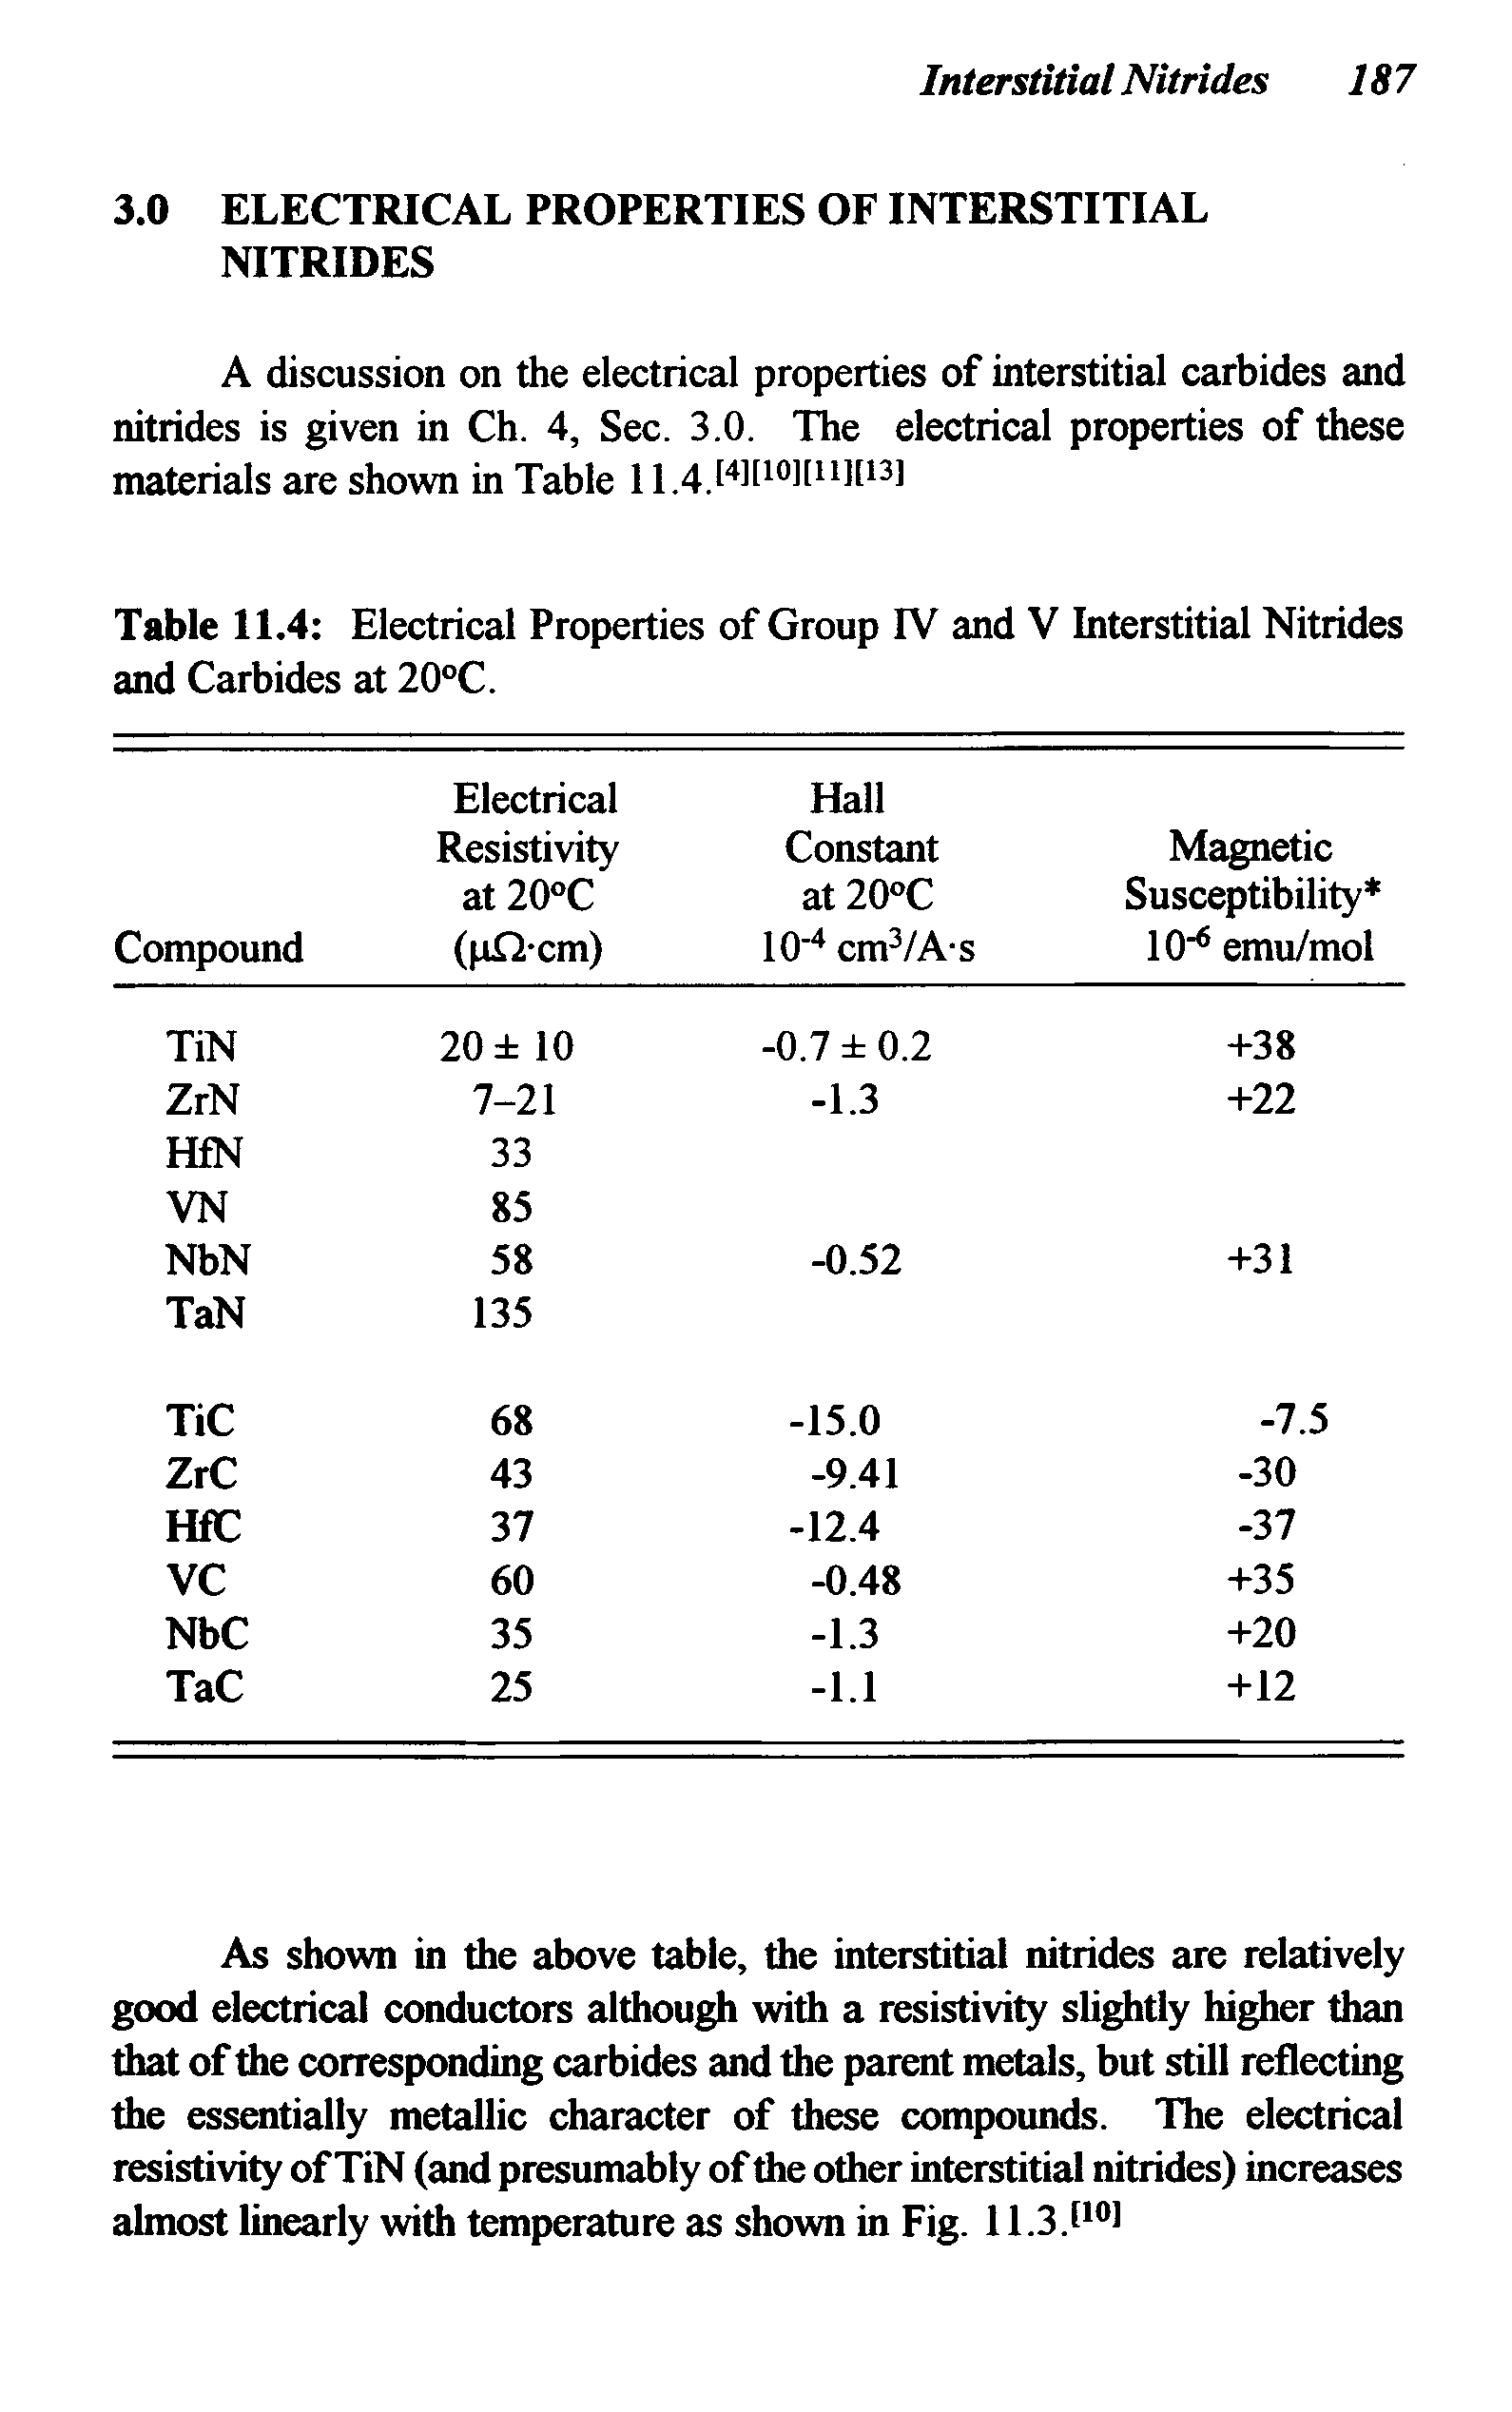 Table 11.4 Electrical Properties of Group IV and V Interstitial Nitrides and Carbides at 20°C.